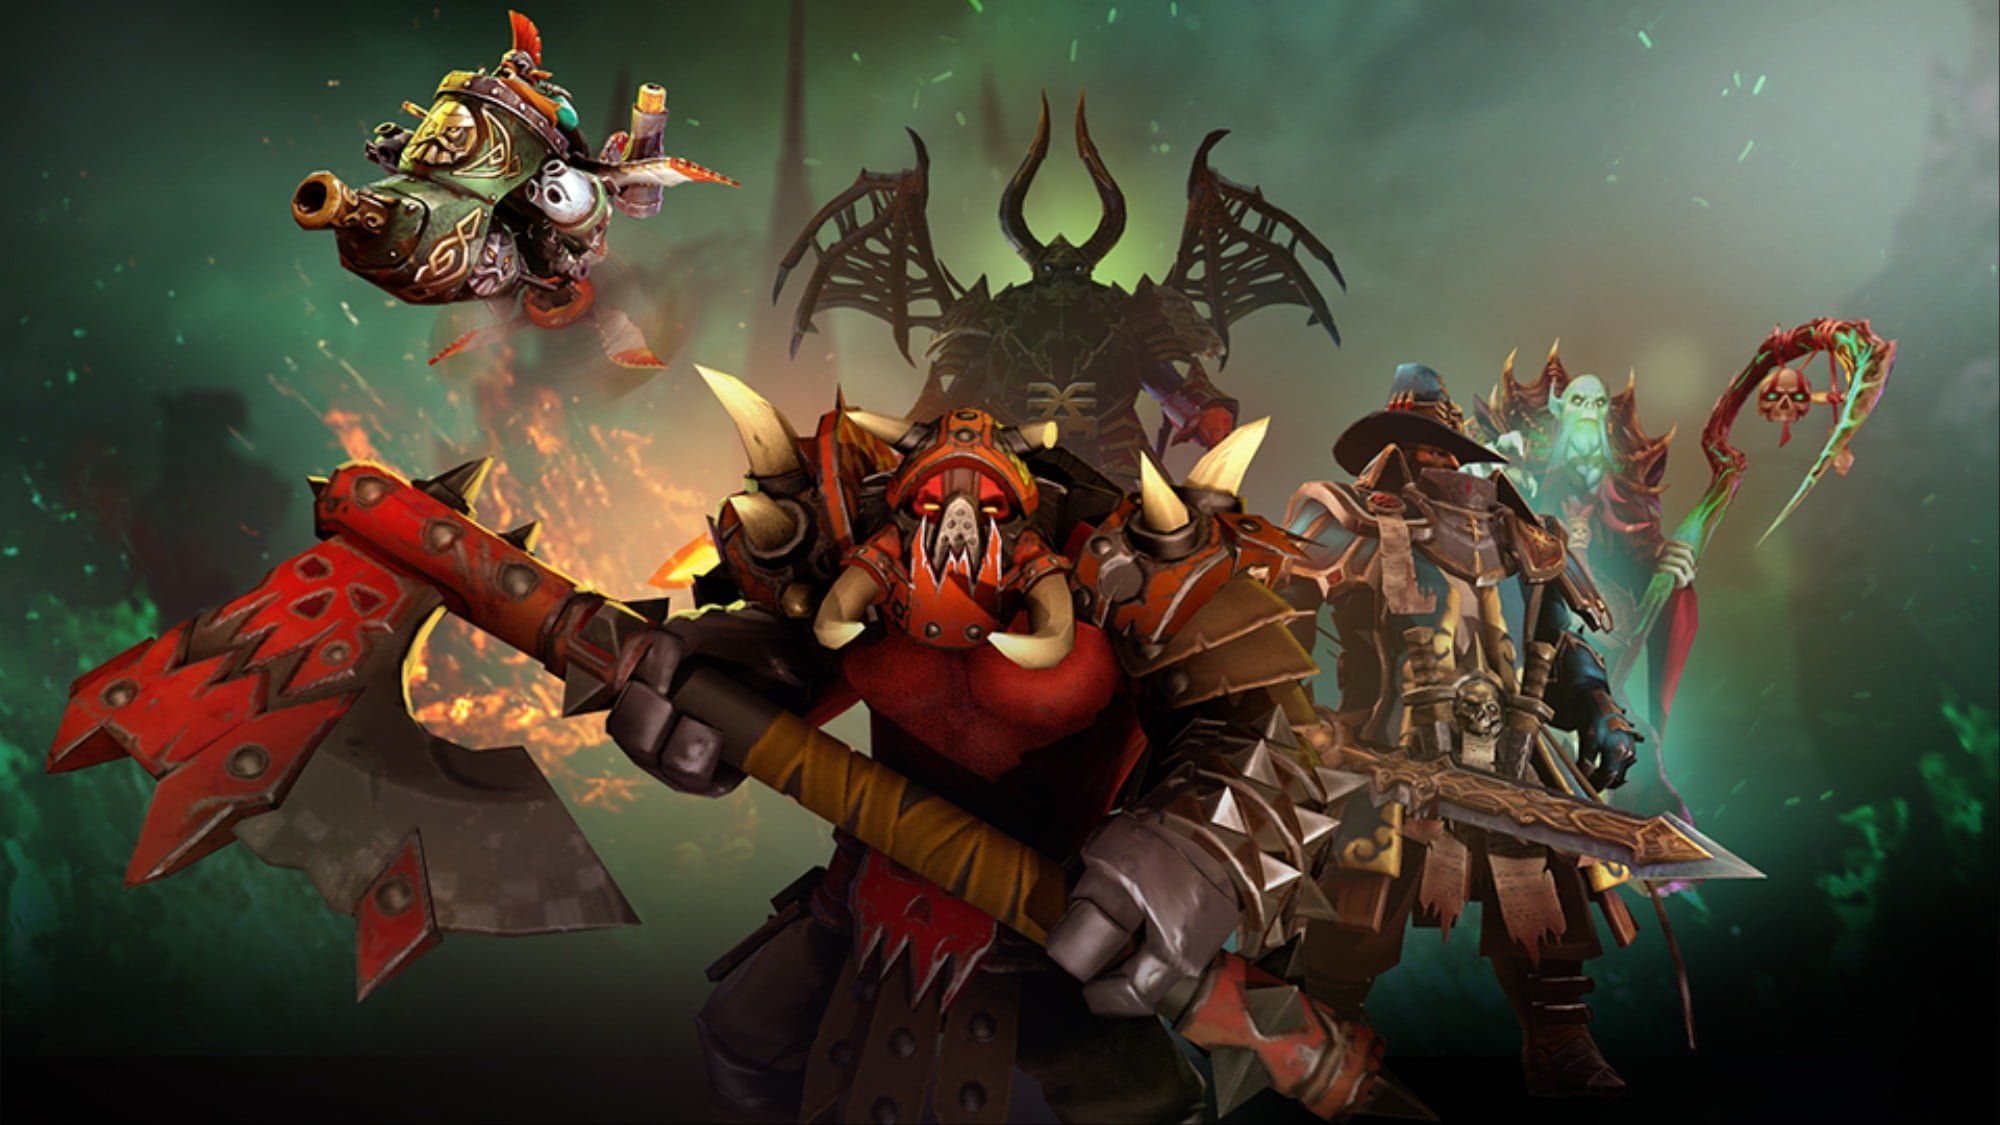 Dota 2 Dueling Fates Update Goes Live on November 1